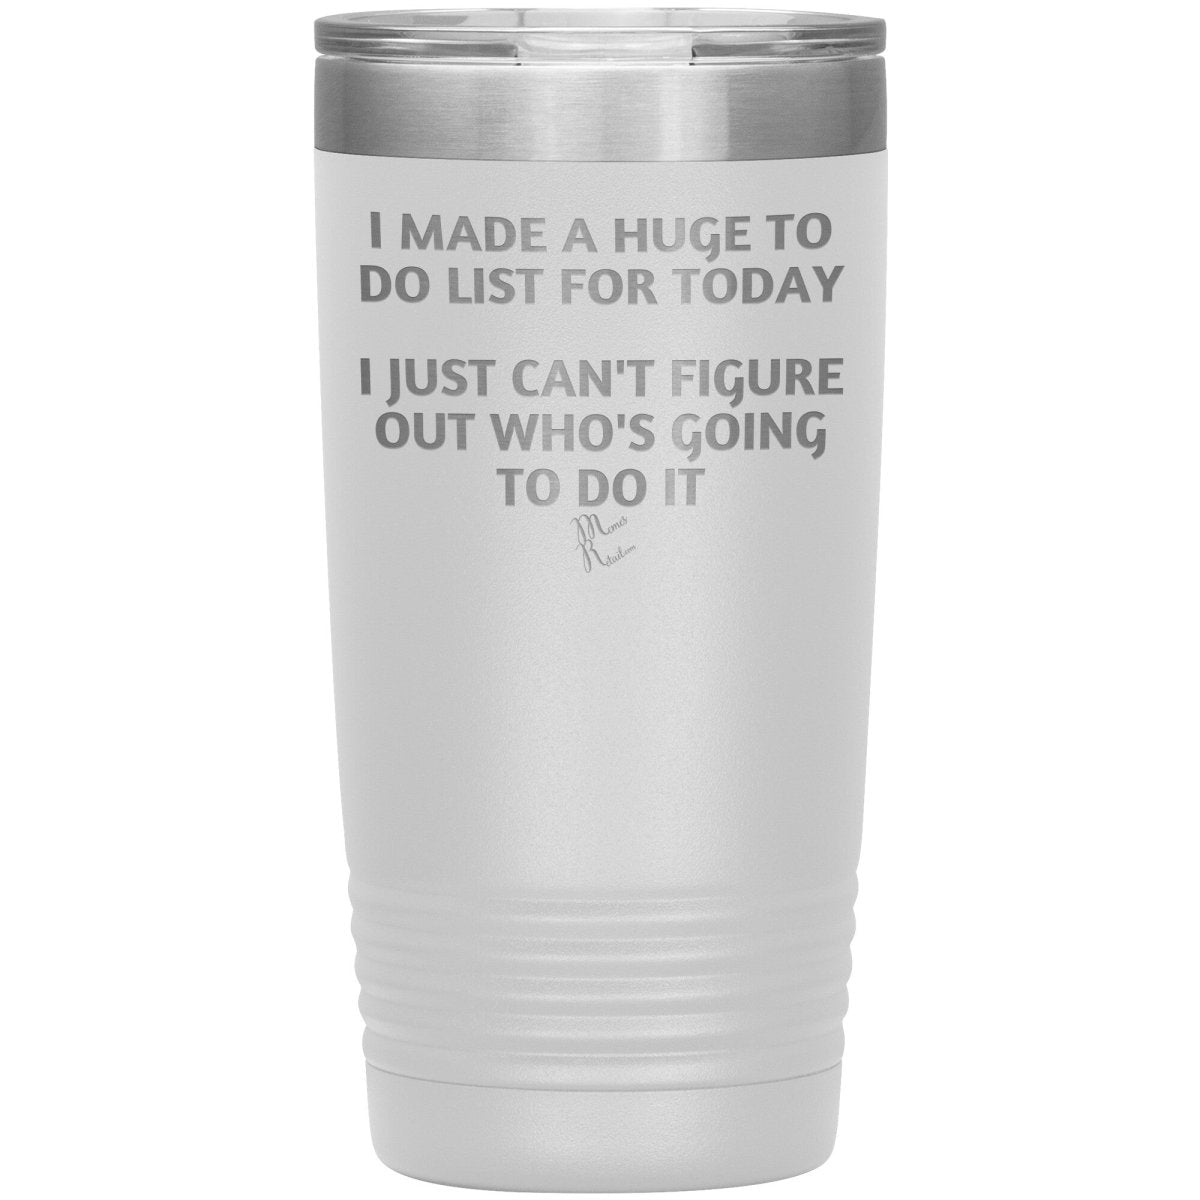 I made a huge to do list for today. I just can't figure out who's going to do it Tumblers, 20oz Insulated Tumbler / White - MemesRetail.com